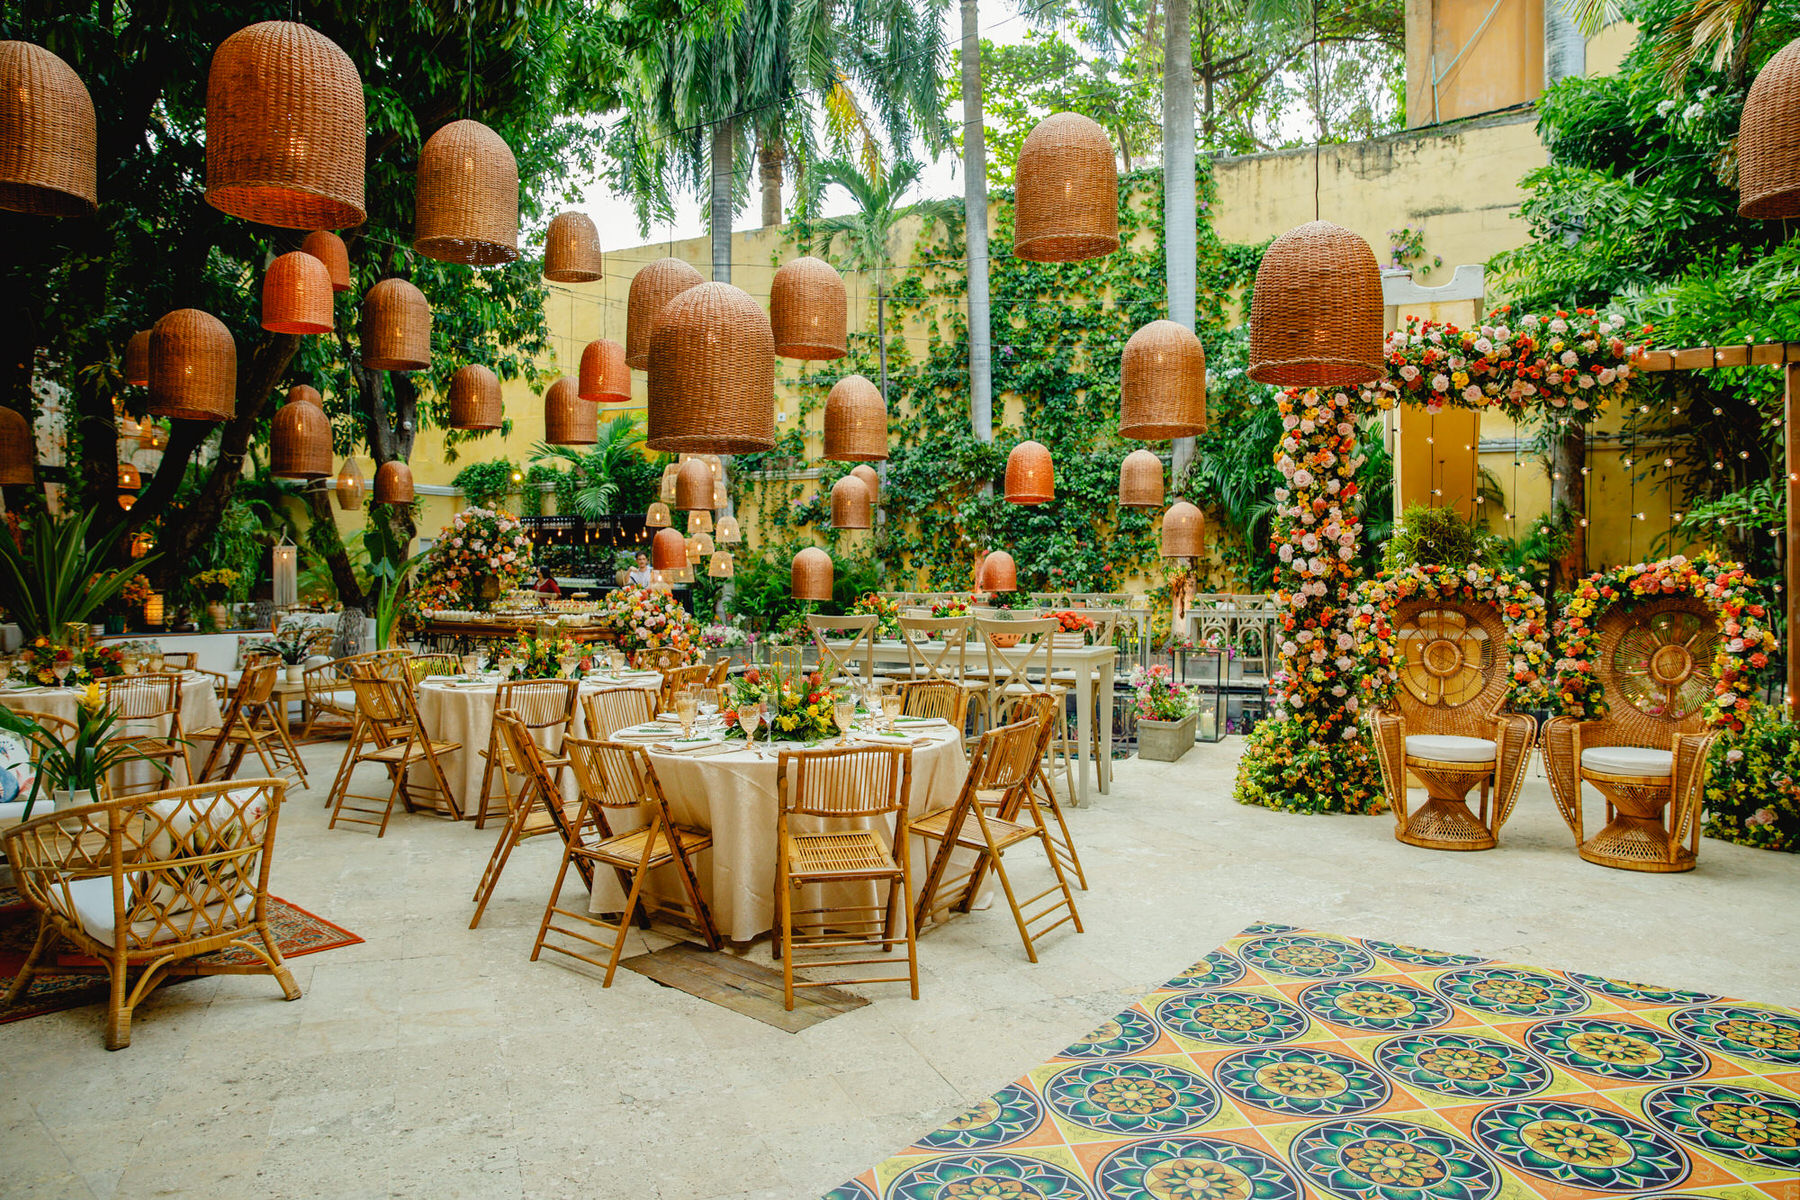 Decorated venue with vibrant colors and elements from both Hindu and Muslim traditions for a fusion wedding in Cartagena de Indias.